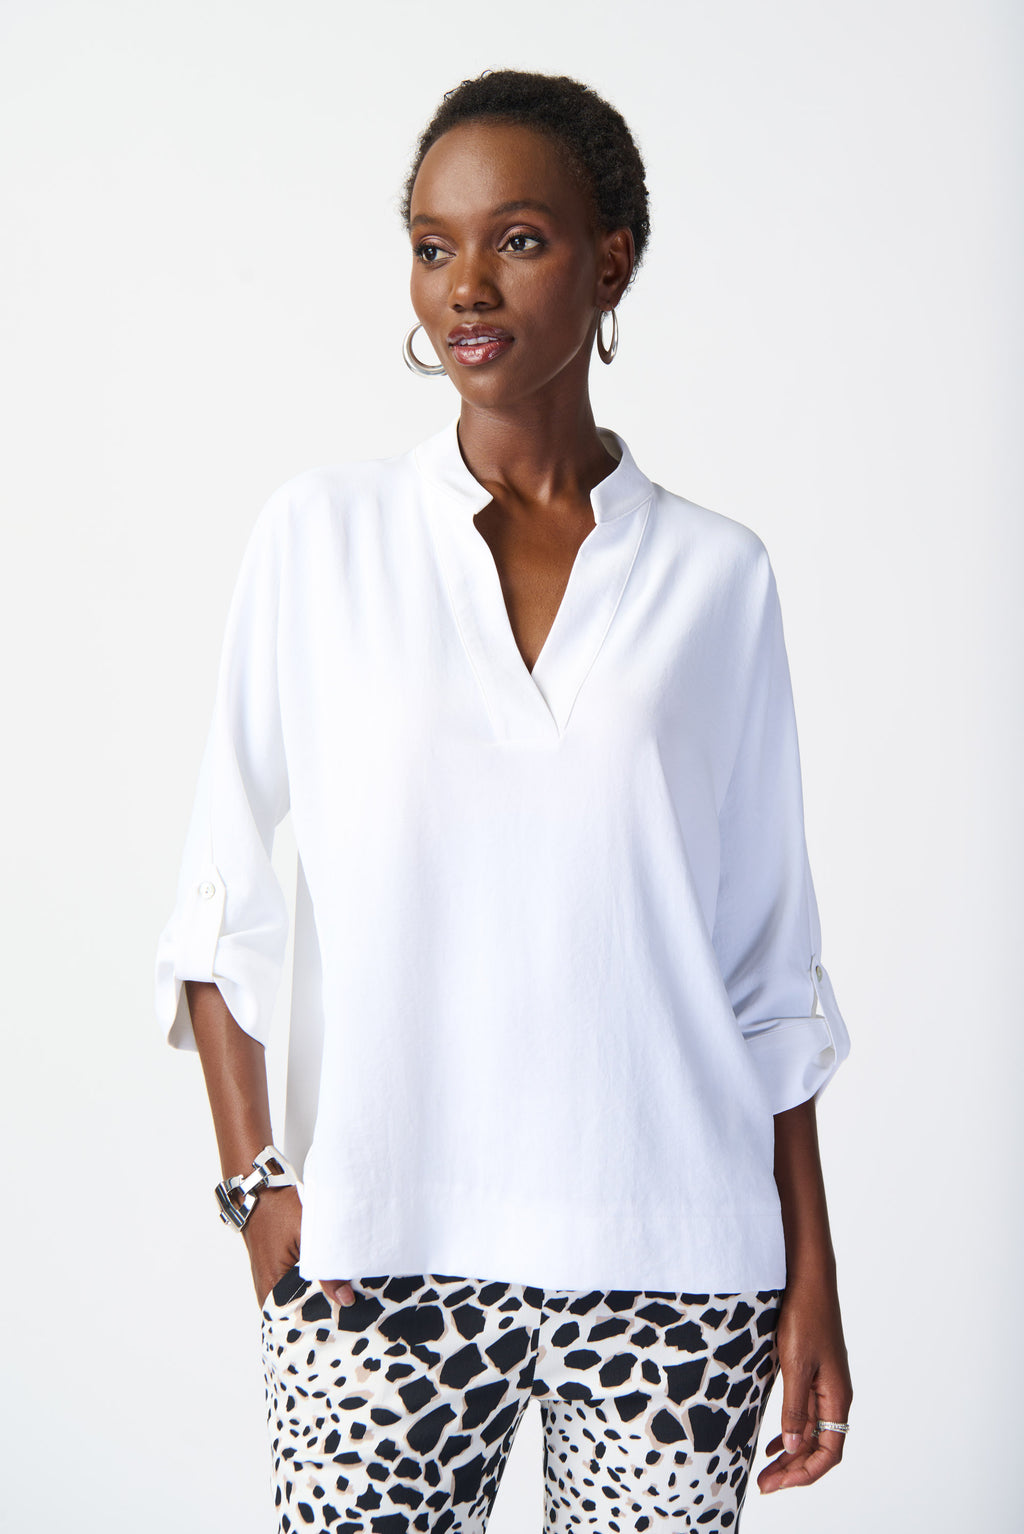 Tailored in a loose relaxed fit, this woven knit top can effortlessly be styled from day to night. The mandarin collar adds poise to this contemporary design and the three-quarter dolman sleeves adorned with cuffs and tabs elevate the garment’s boxy silhouette and understated chic appeal.